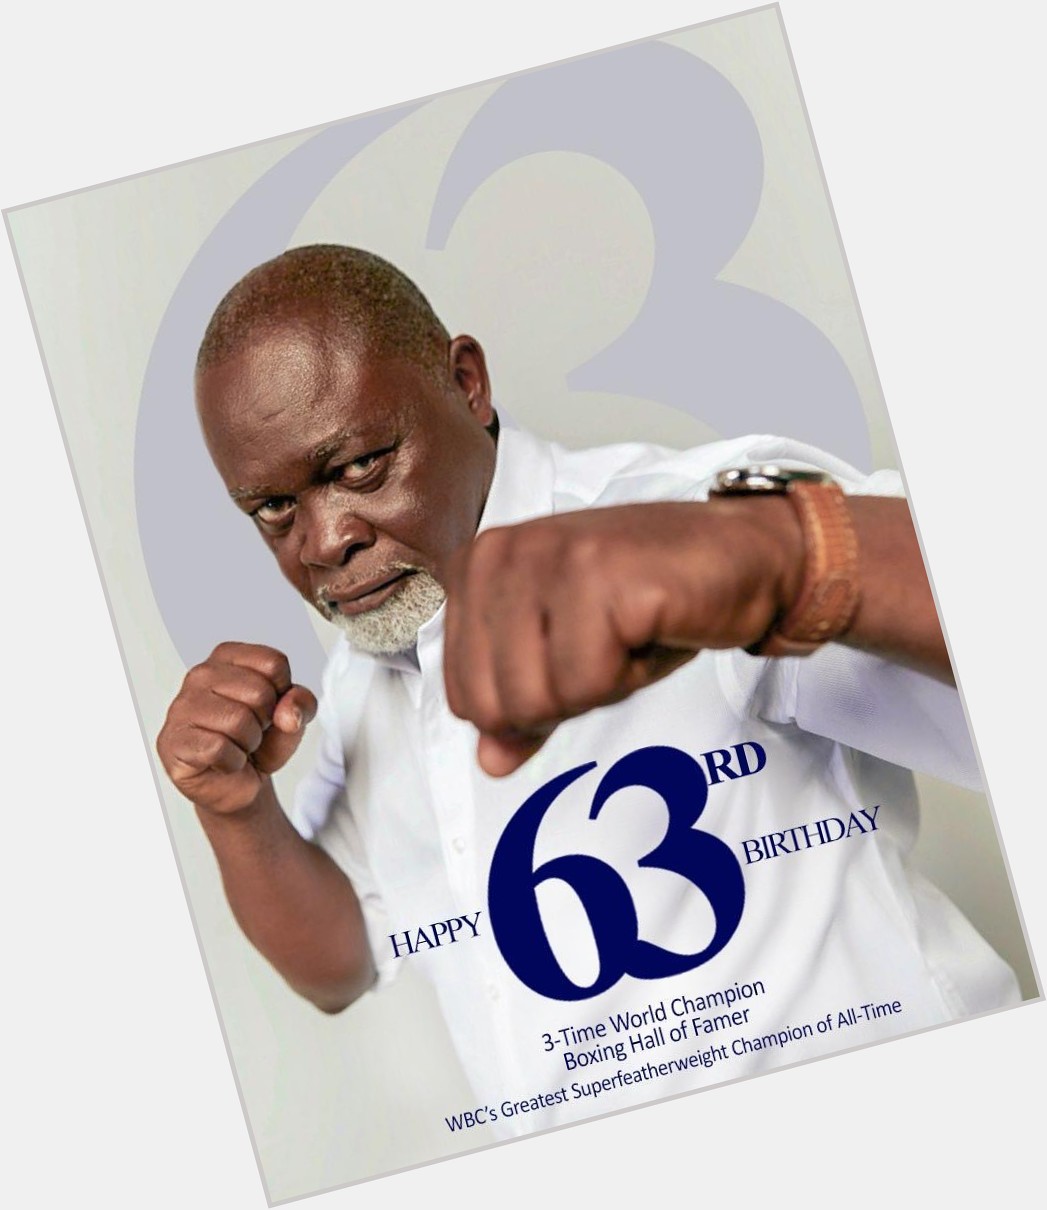 Happy 63rd Birthday to Azumah Nelson, legend, friend and inspiration! 